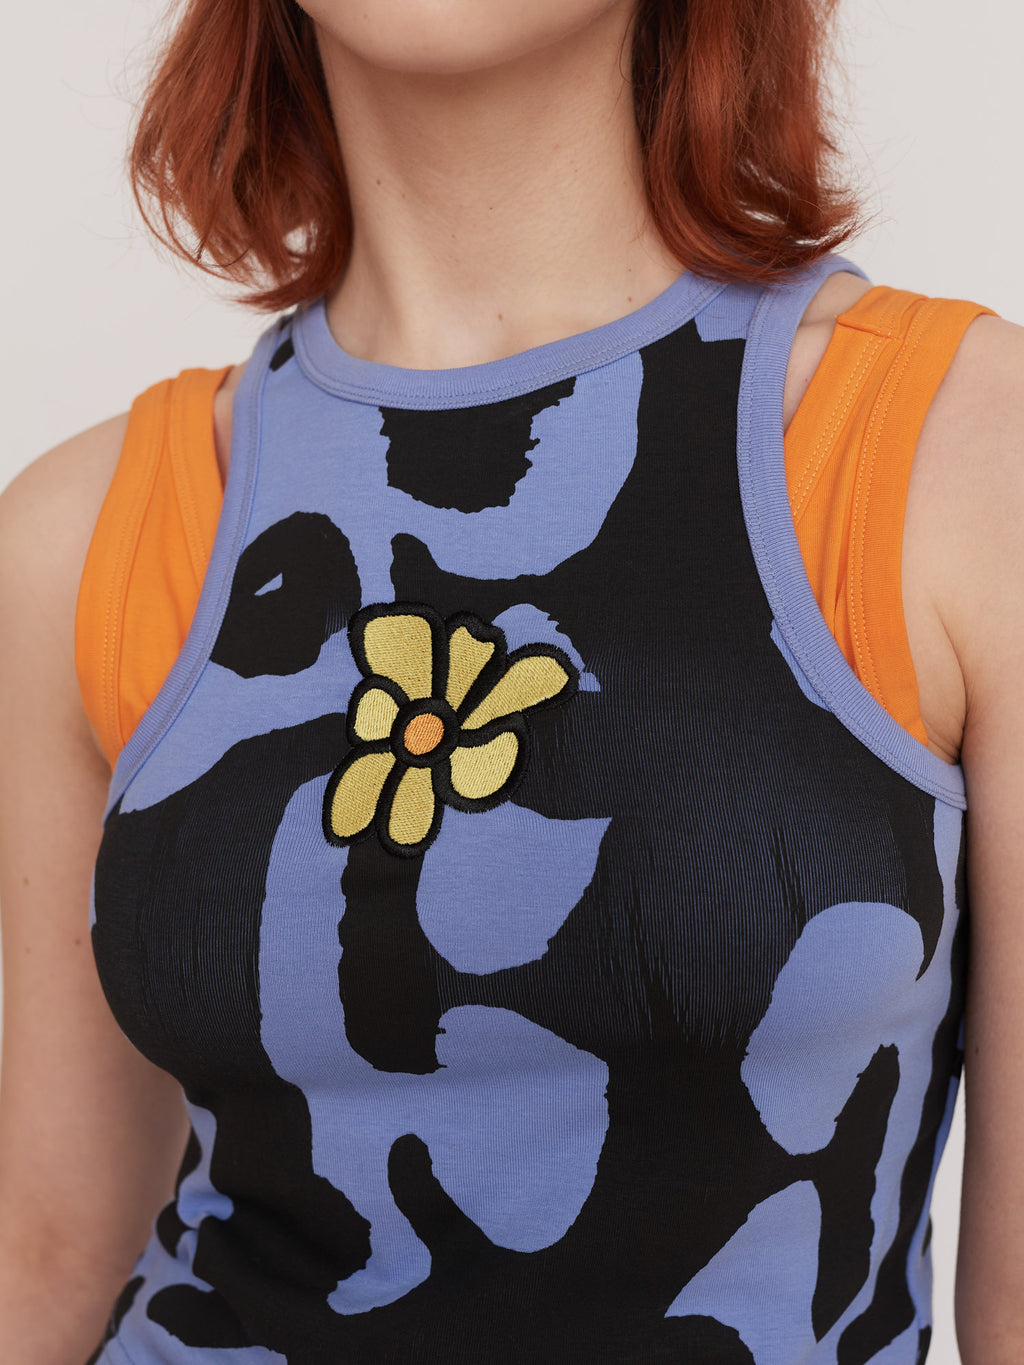 Abstract Vest